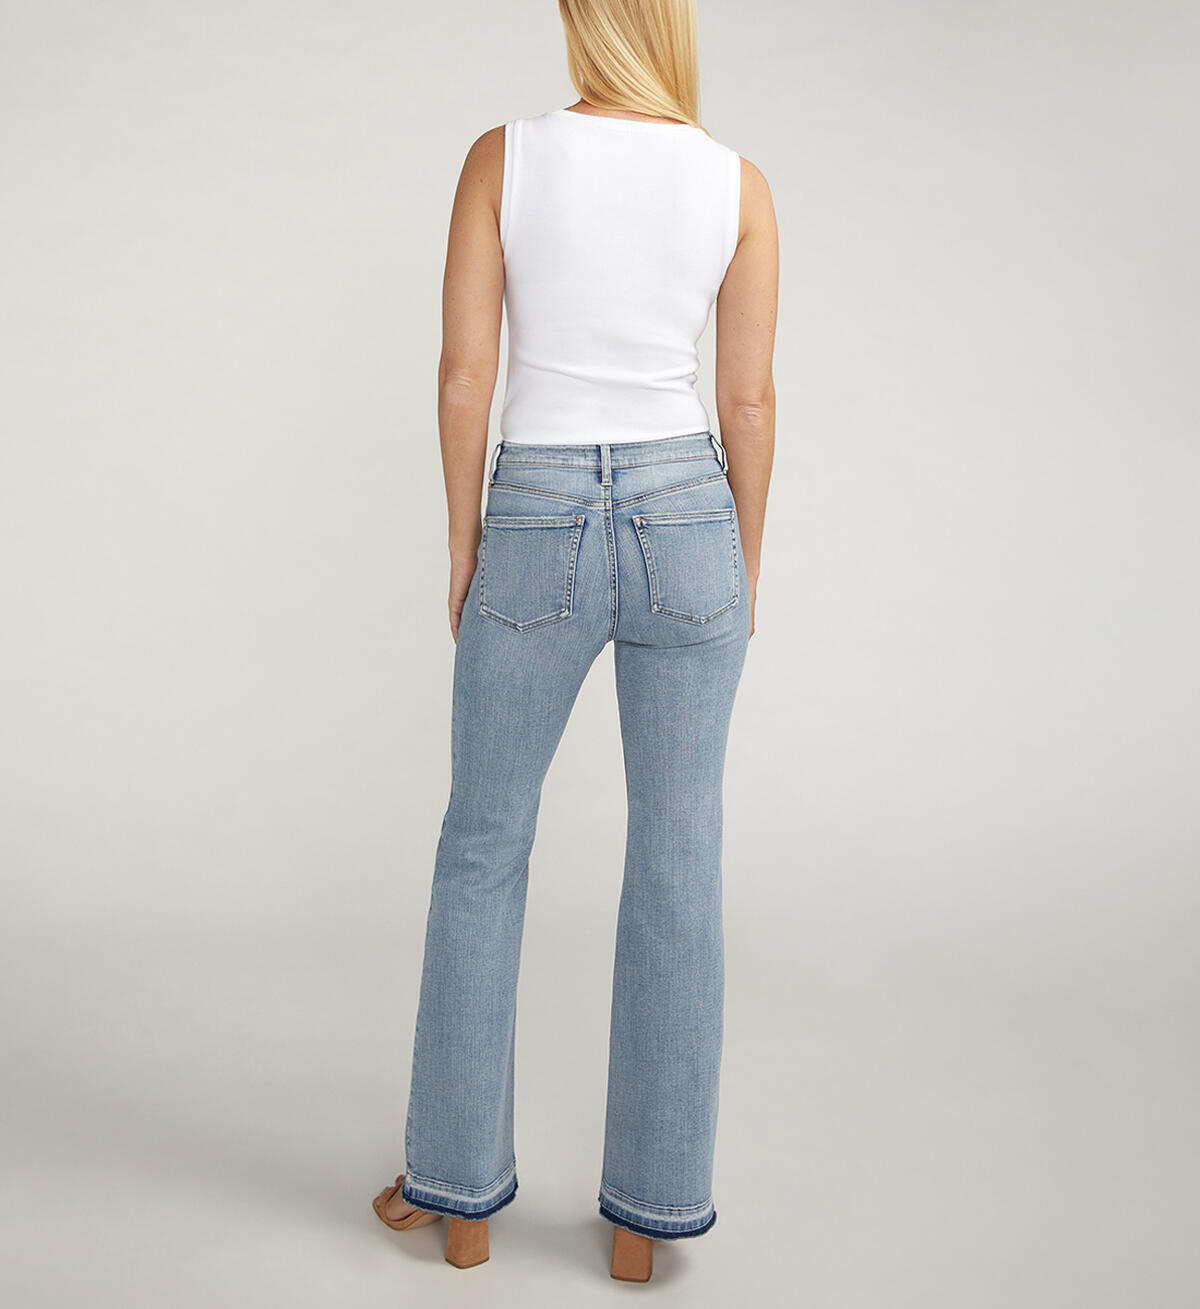 Most Wanted Mid Rise Flare Jeans, , hi-res image number 1